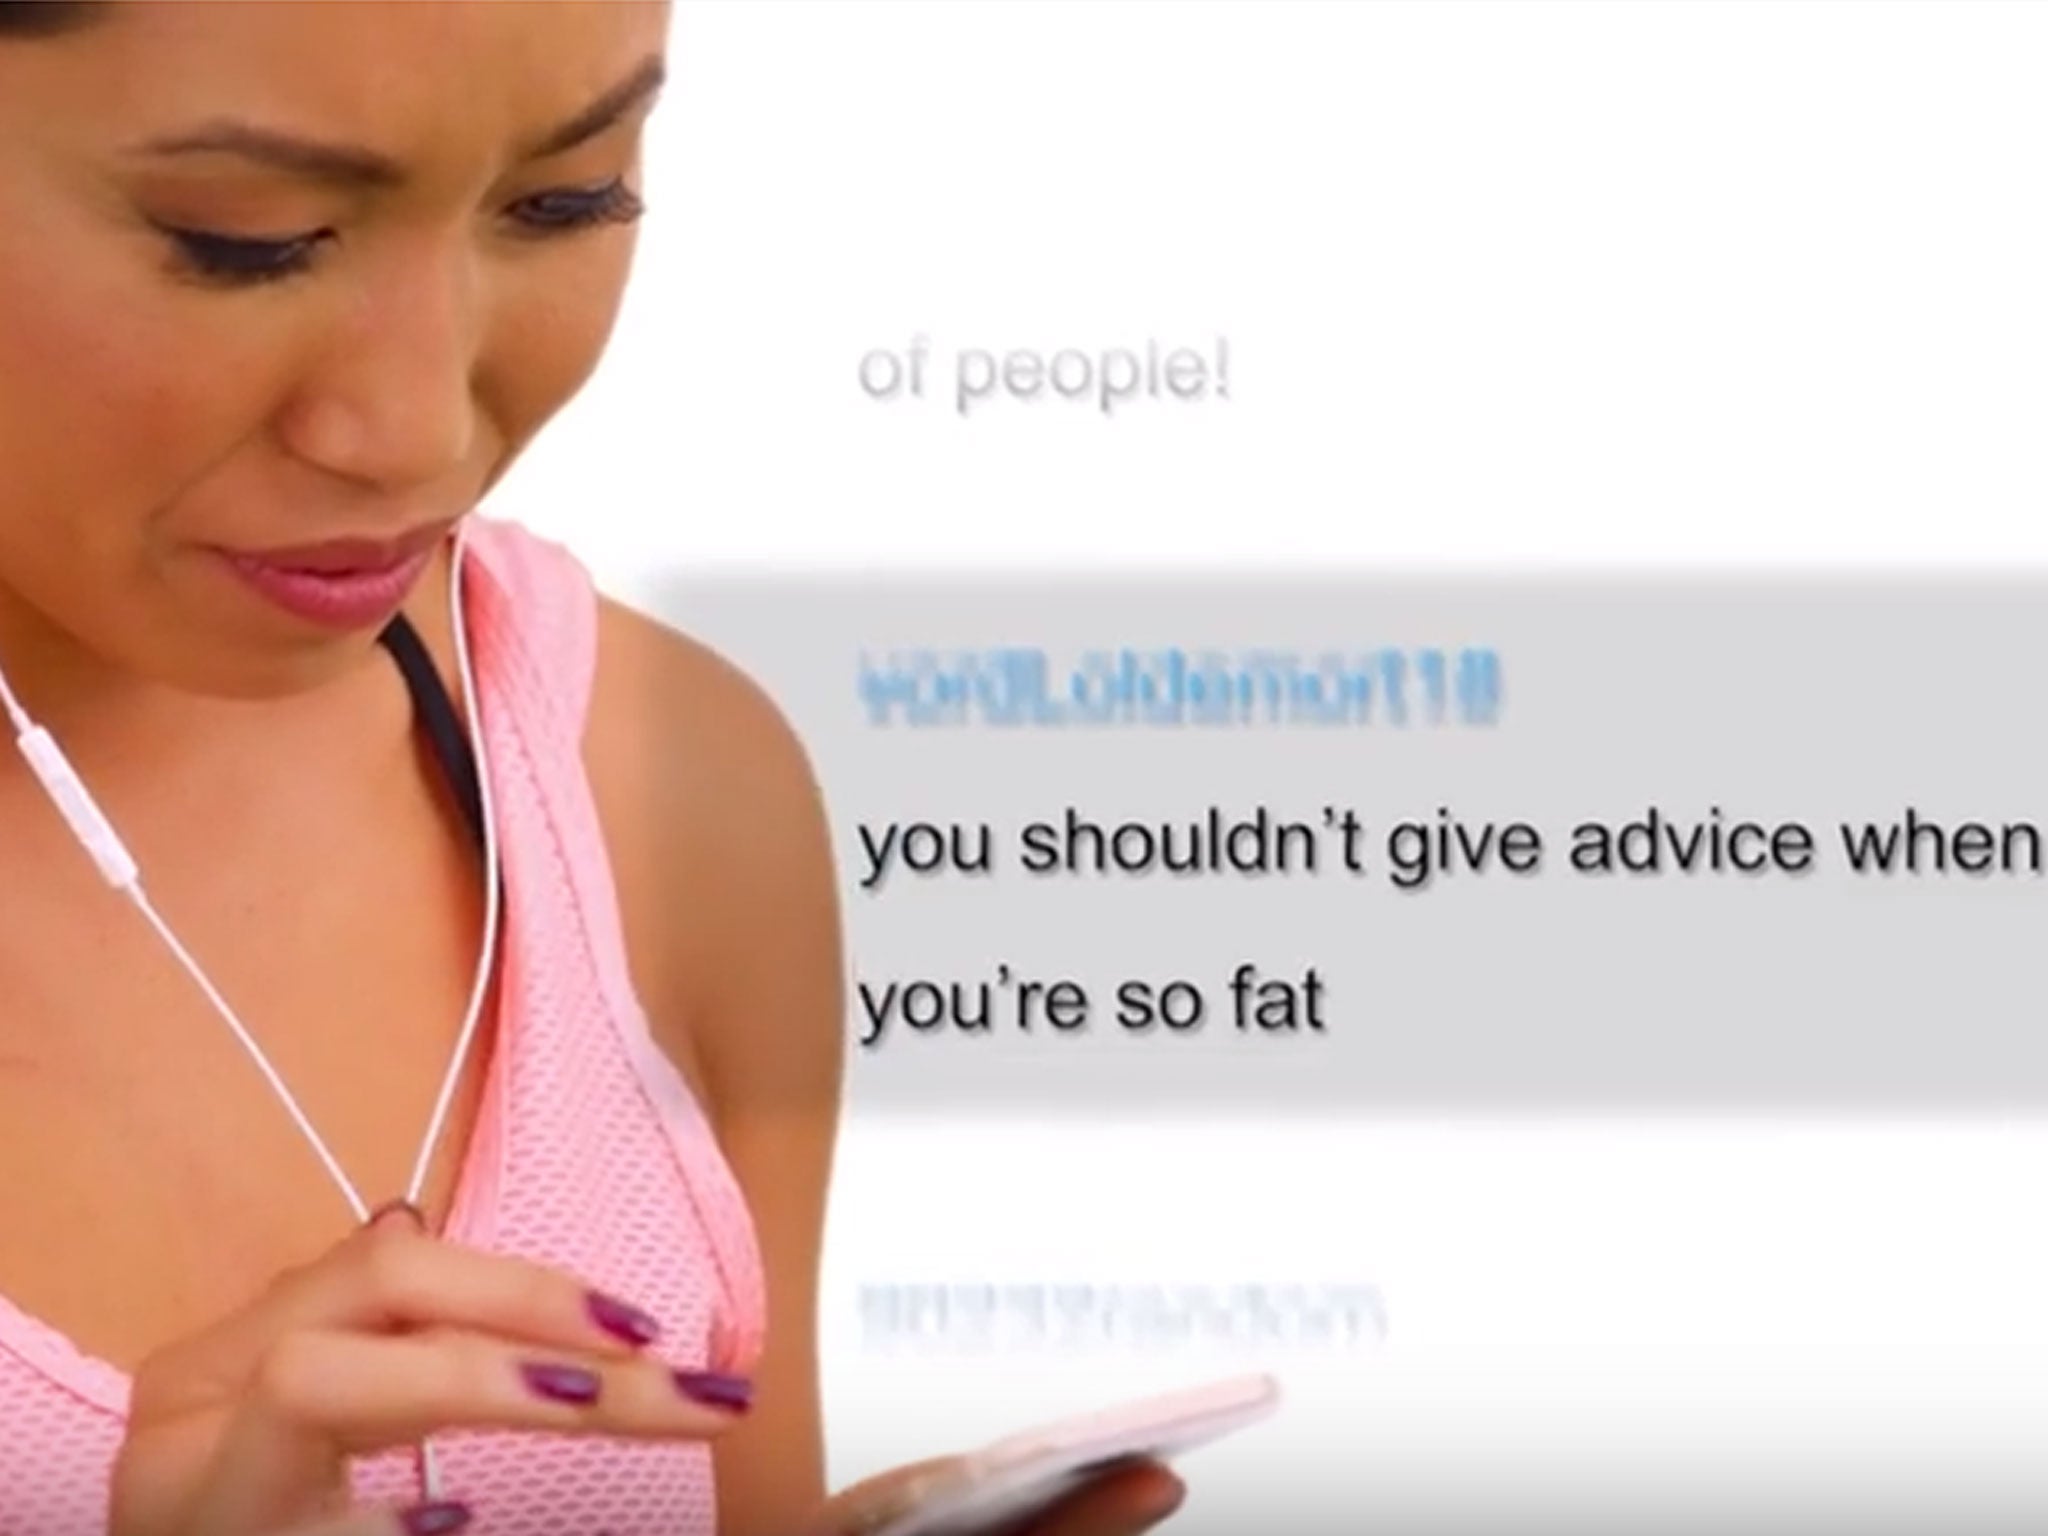 Cassey Ho reads hurtful comments about her body in The 'Perfect' Body video (Image: YouTube/Blogilates)